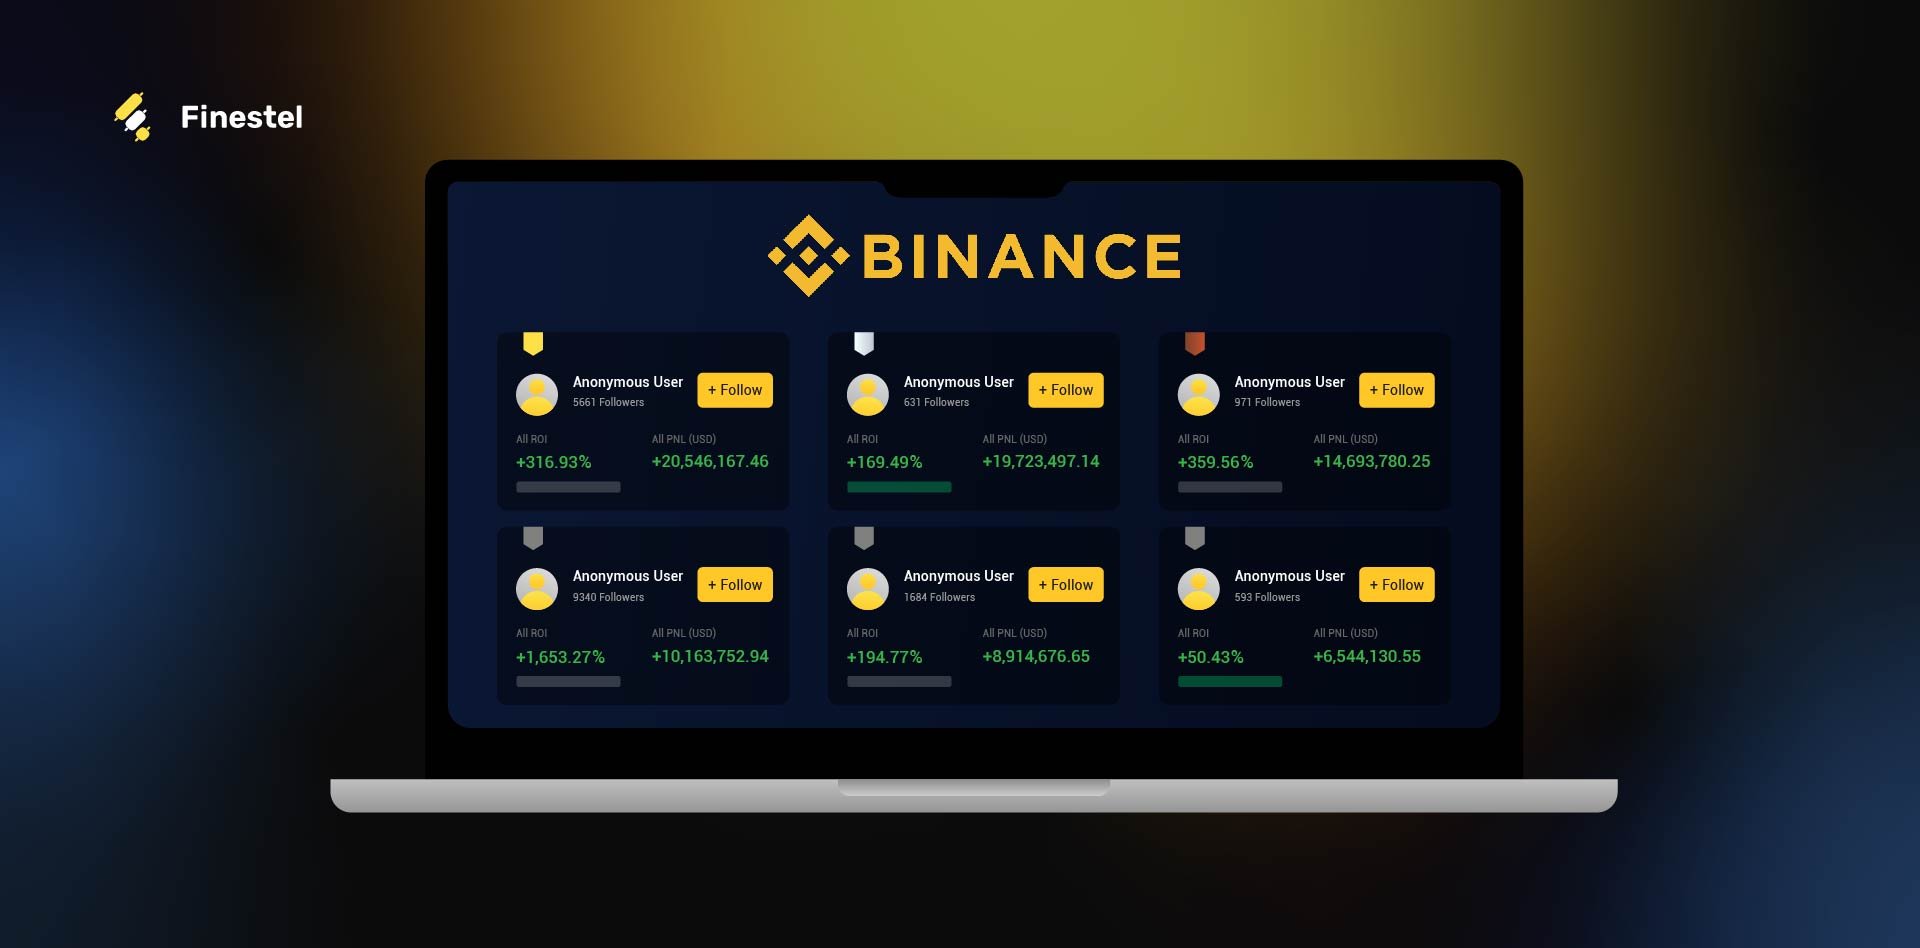 Is Copy Trading Legal and Available on Binance?